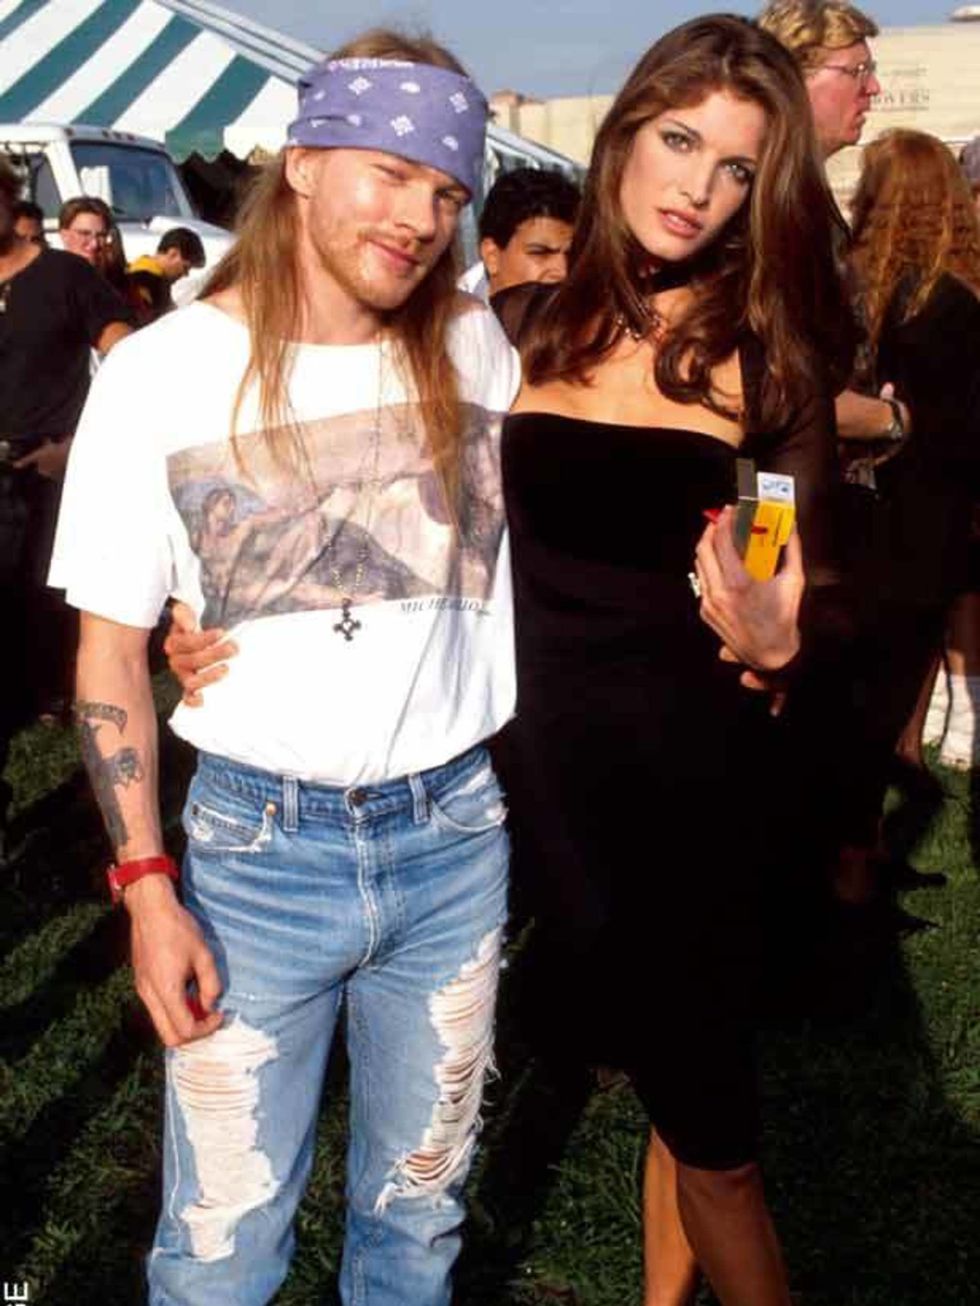 <p>American model Stephanie Seymour had one of the highest of high-profile fashion/rock relationships, going so far as to star in Guns N' Roses's 'November Rain' and 'Don't Cry' videos with then-beau Axl Rose. Together from 1991 to 1993, the relationship 